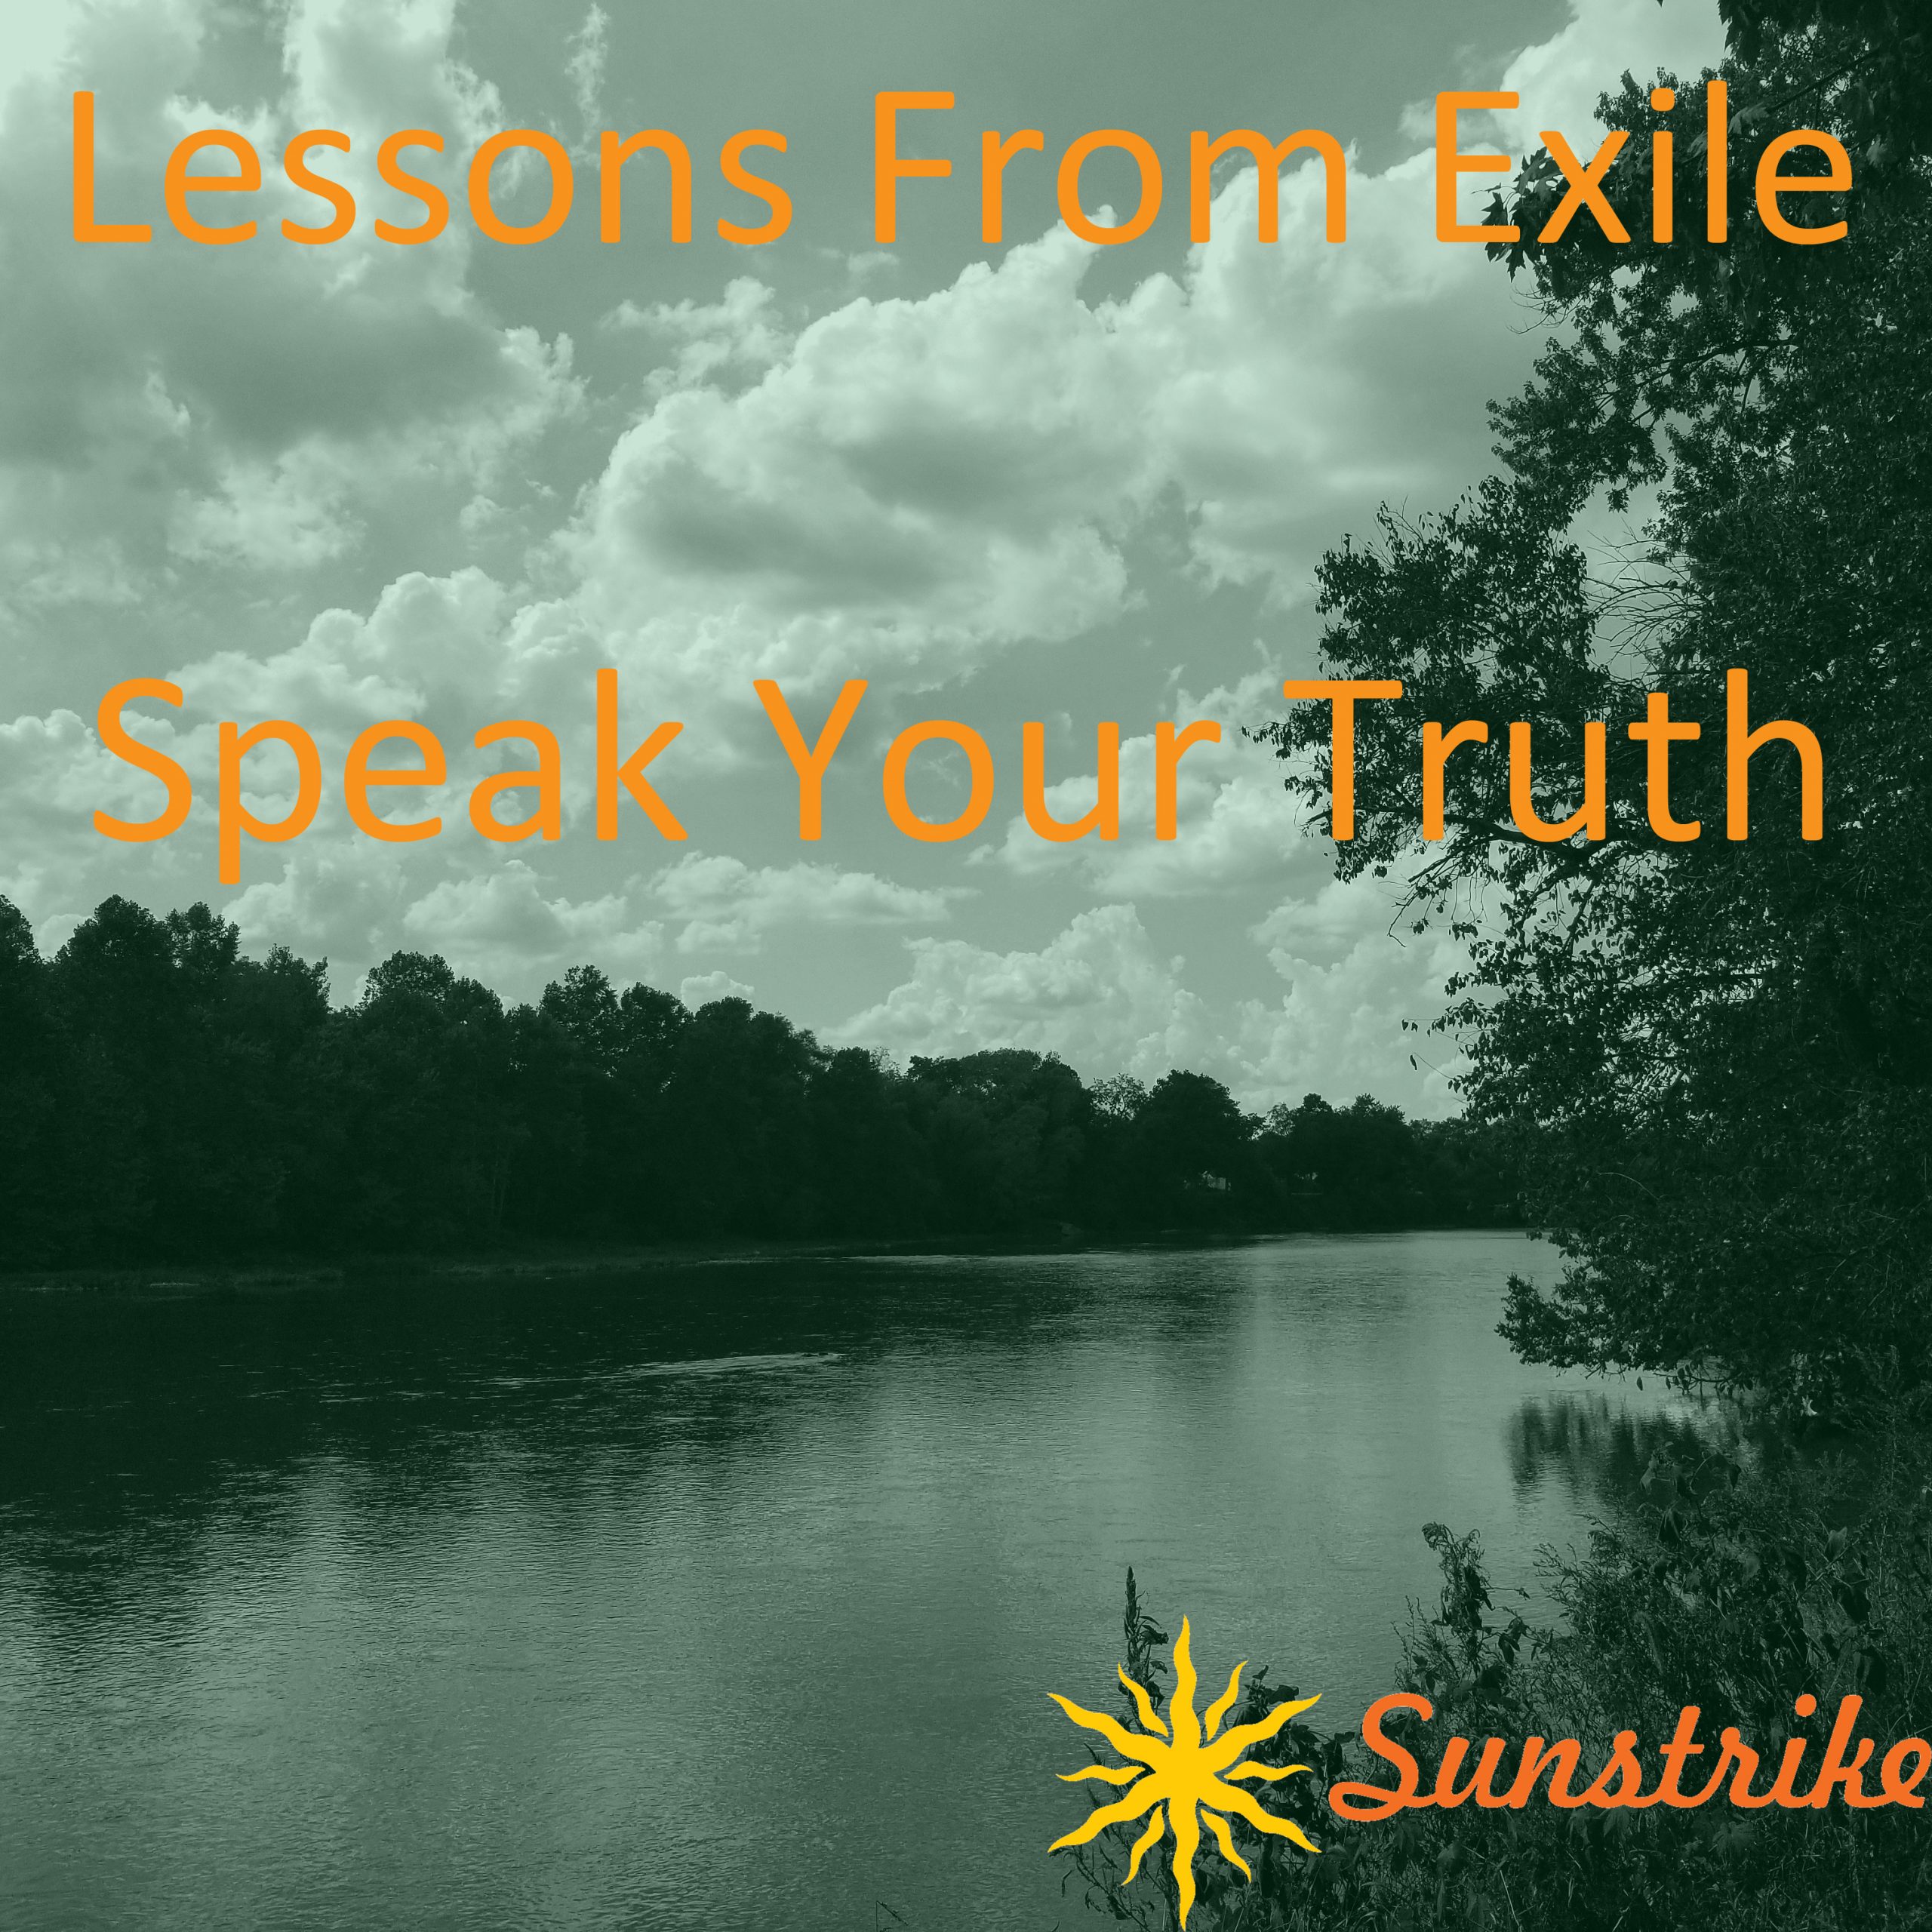 Lessons from Exile #62: Speak Your Truth